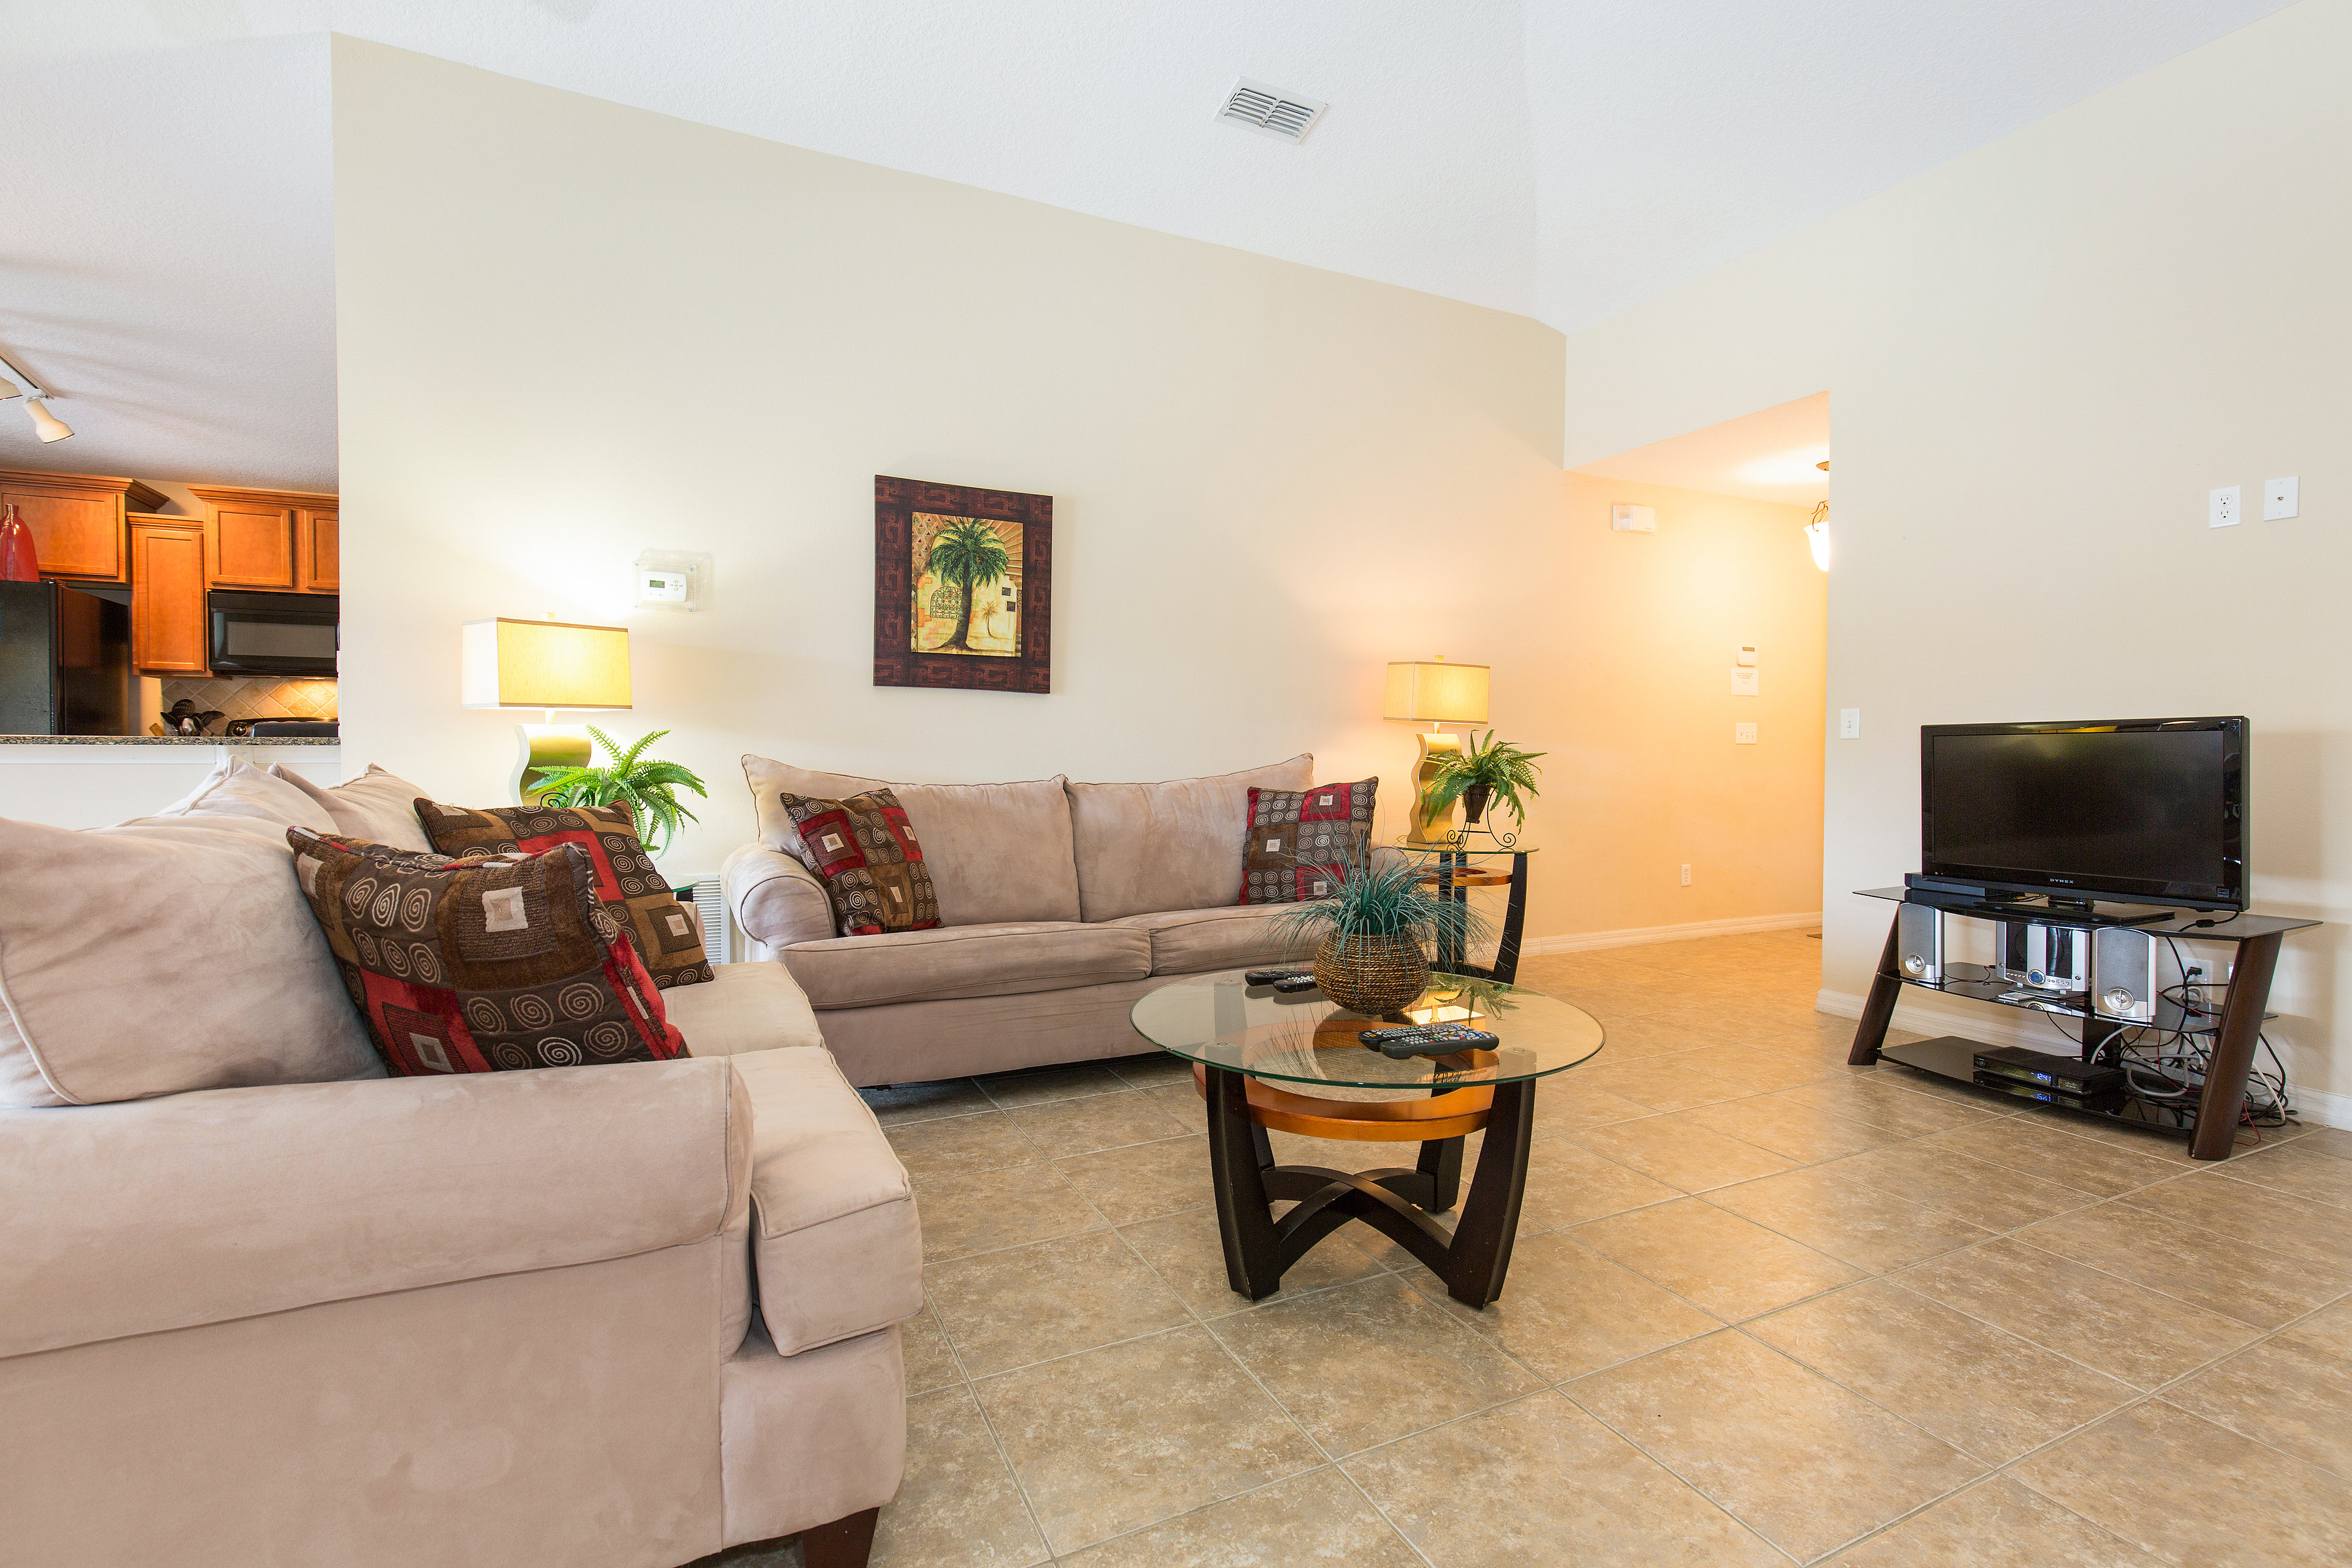 reserve at town center vacation rentals vacation rentals united states florida davenport